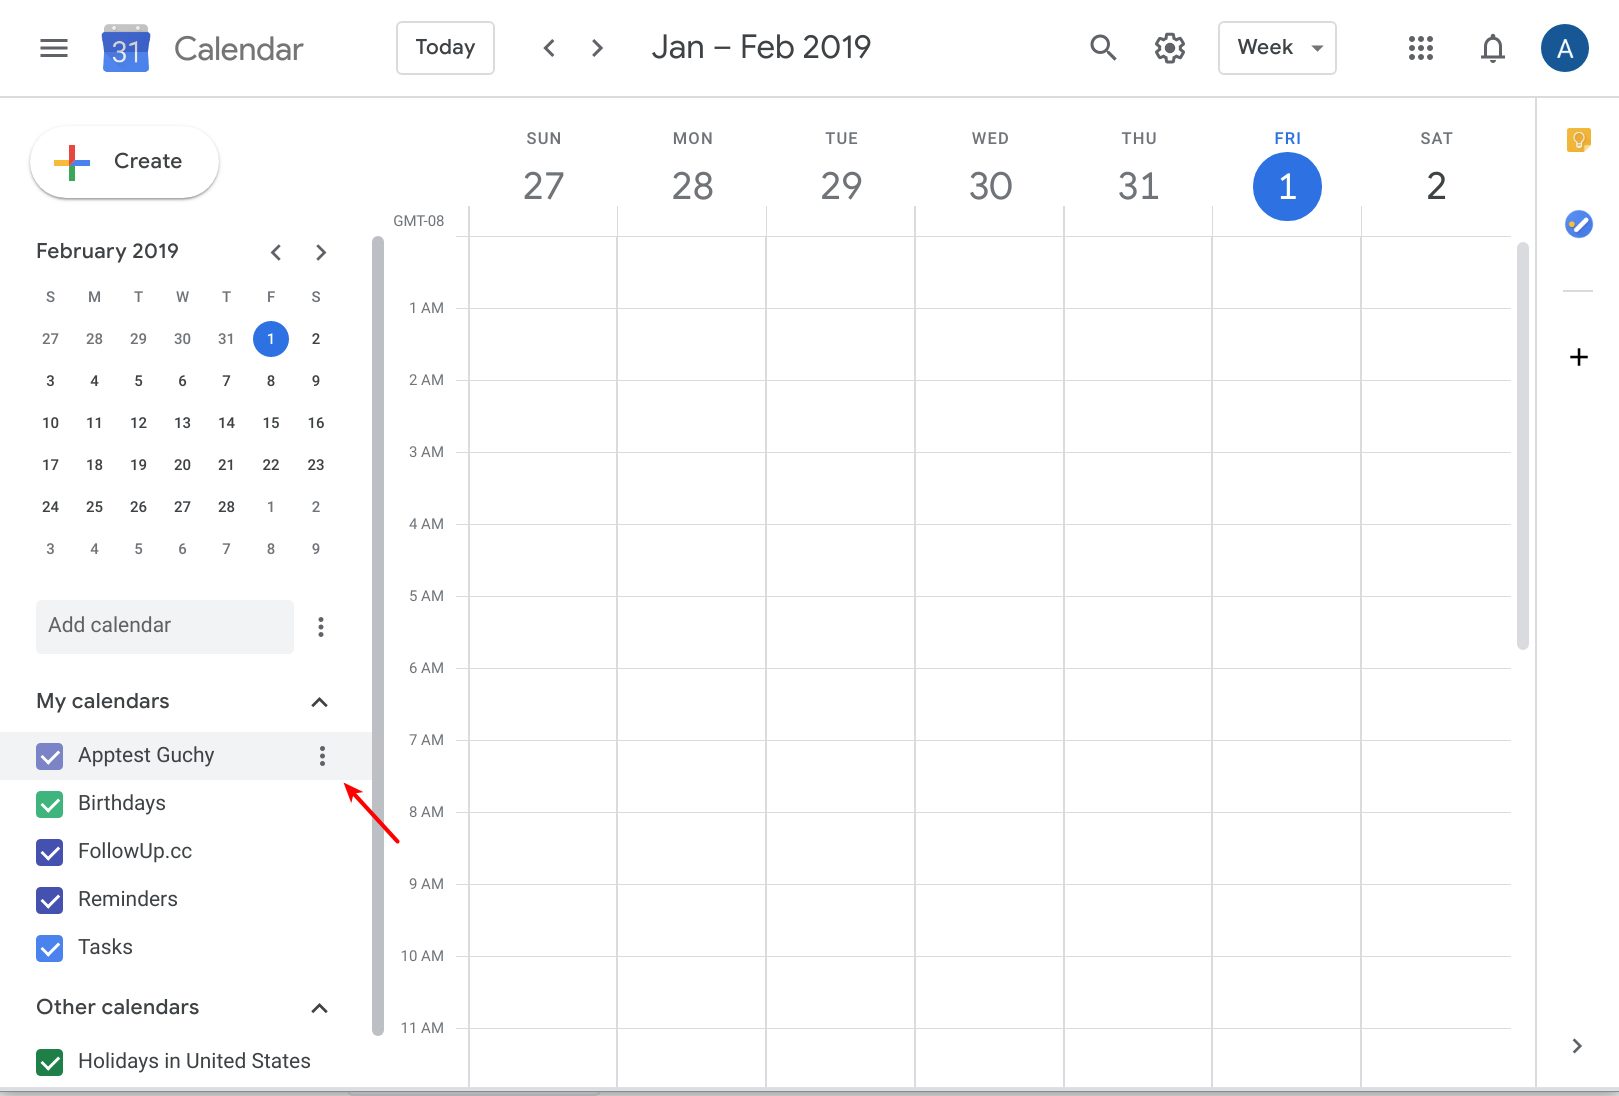 How to find your Google Calendar ID